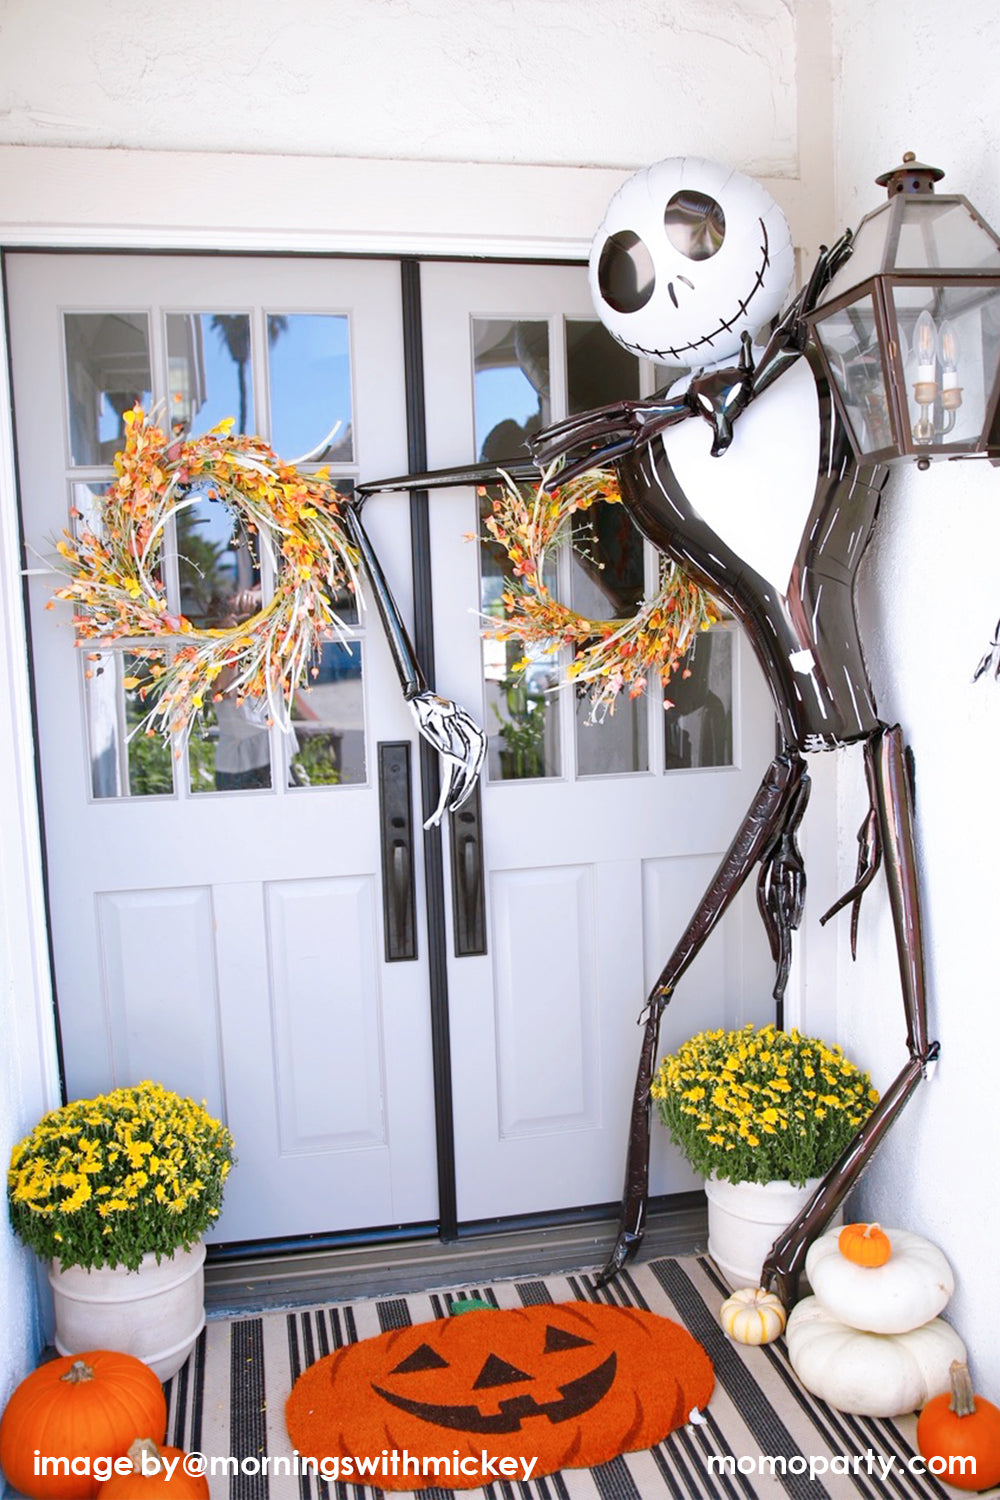 Anagram balloons - 38169 Jack Skellington AirWalkers® P93. This 84 inch The Night Before Christmas Jack Skellington Airwalker Foil Balloon standing in the front door with all the pumpkins around his foot, jack-o-lantern doormat, for a fun halloween season entry decoration.